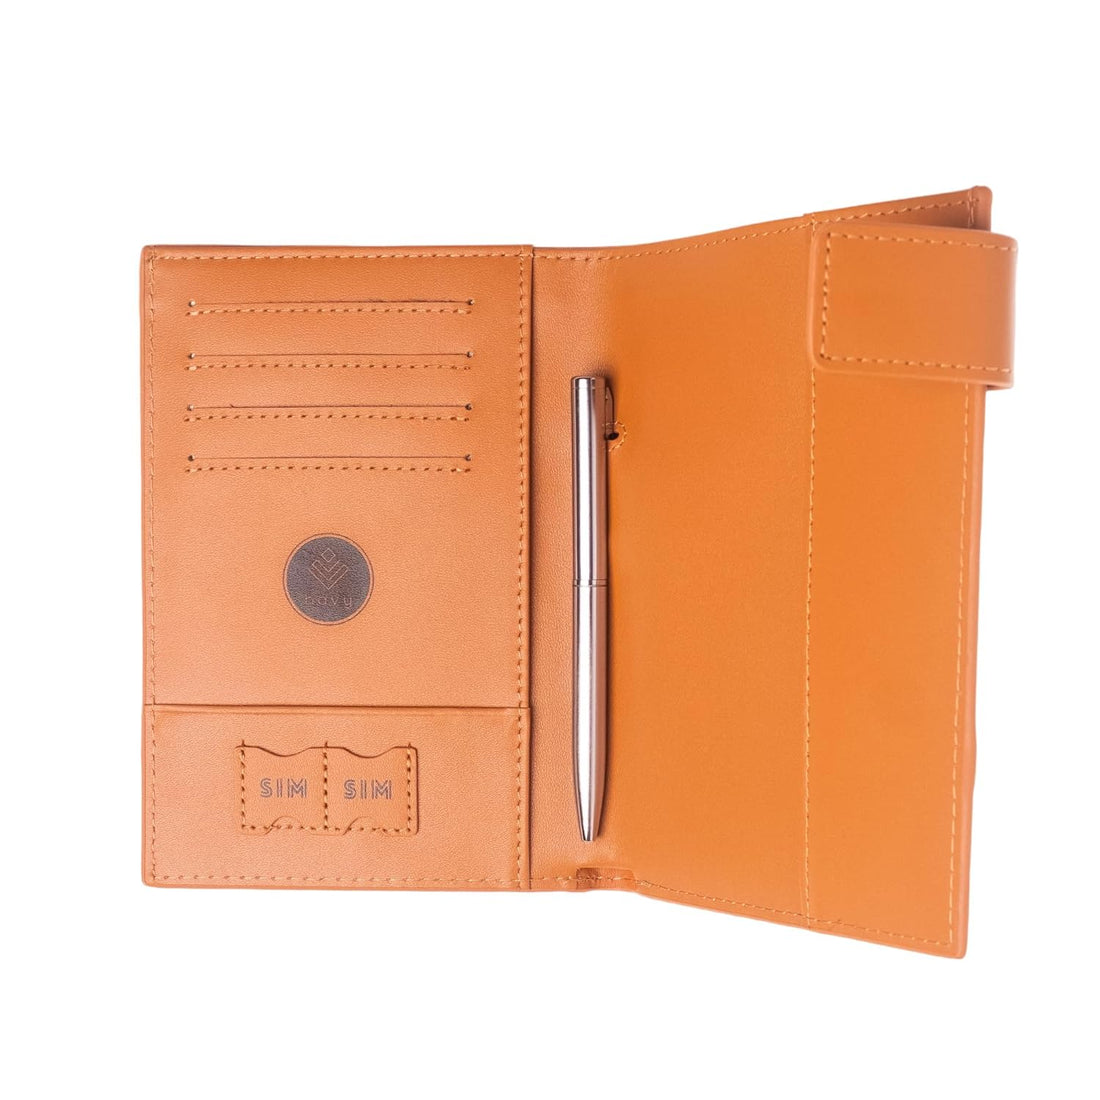 Havy Leather Passport Holder | Luggage Tag with AirTag Slot | Durable and Stylish